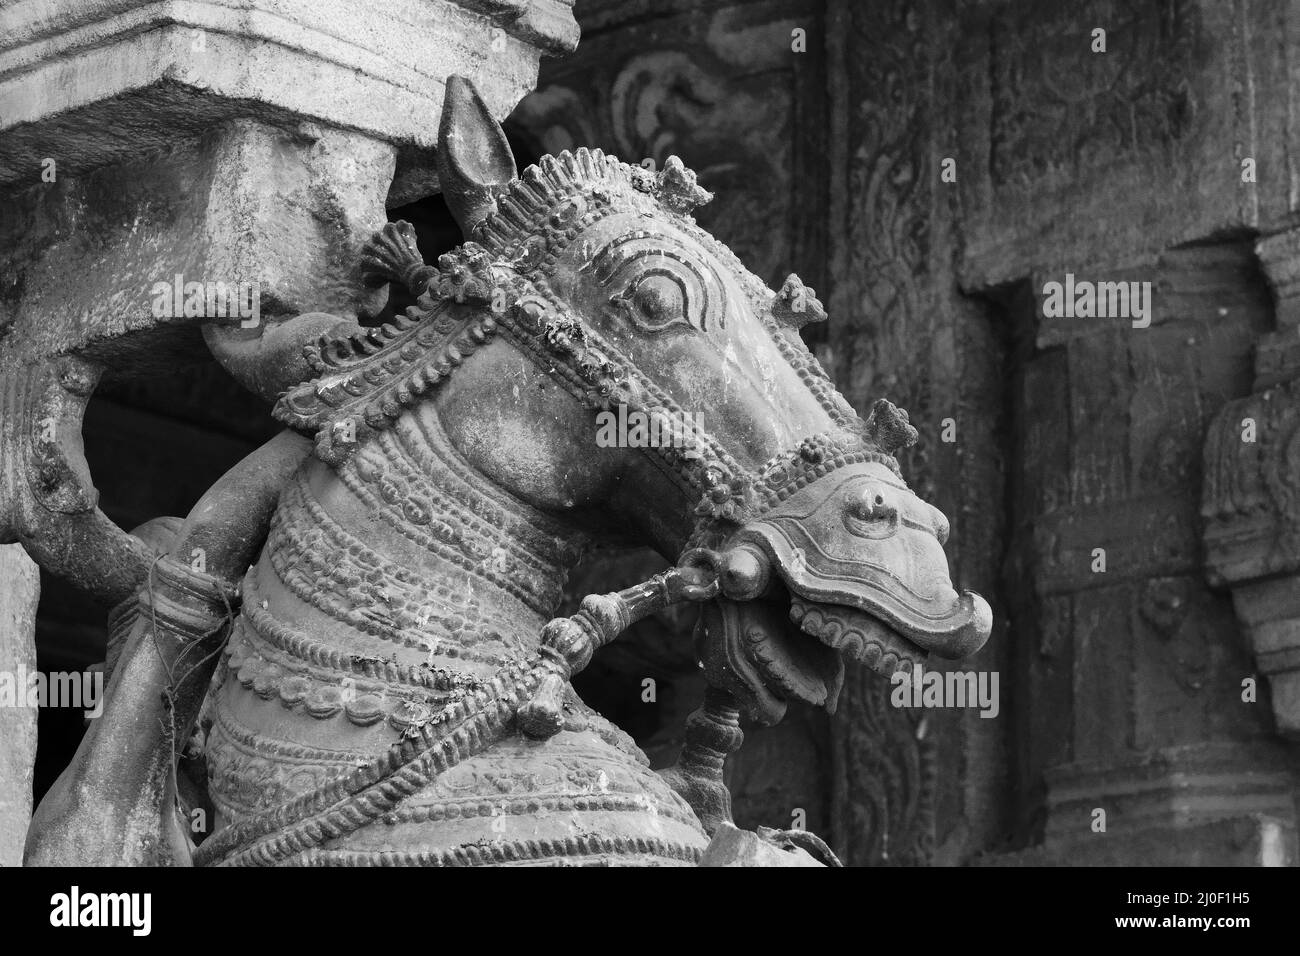 Horse statue in temple in Black and White Stock Photos & Images - Alamy